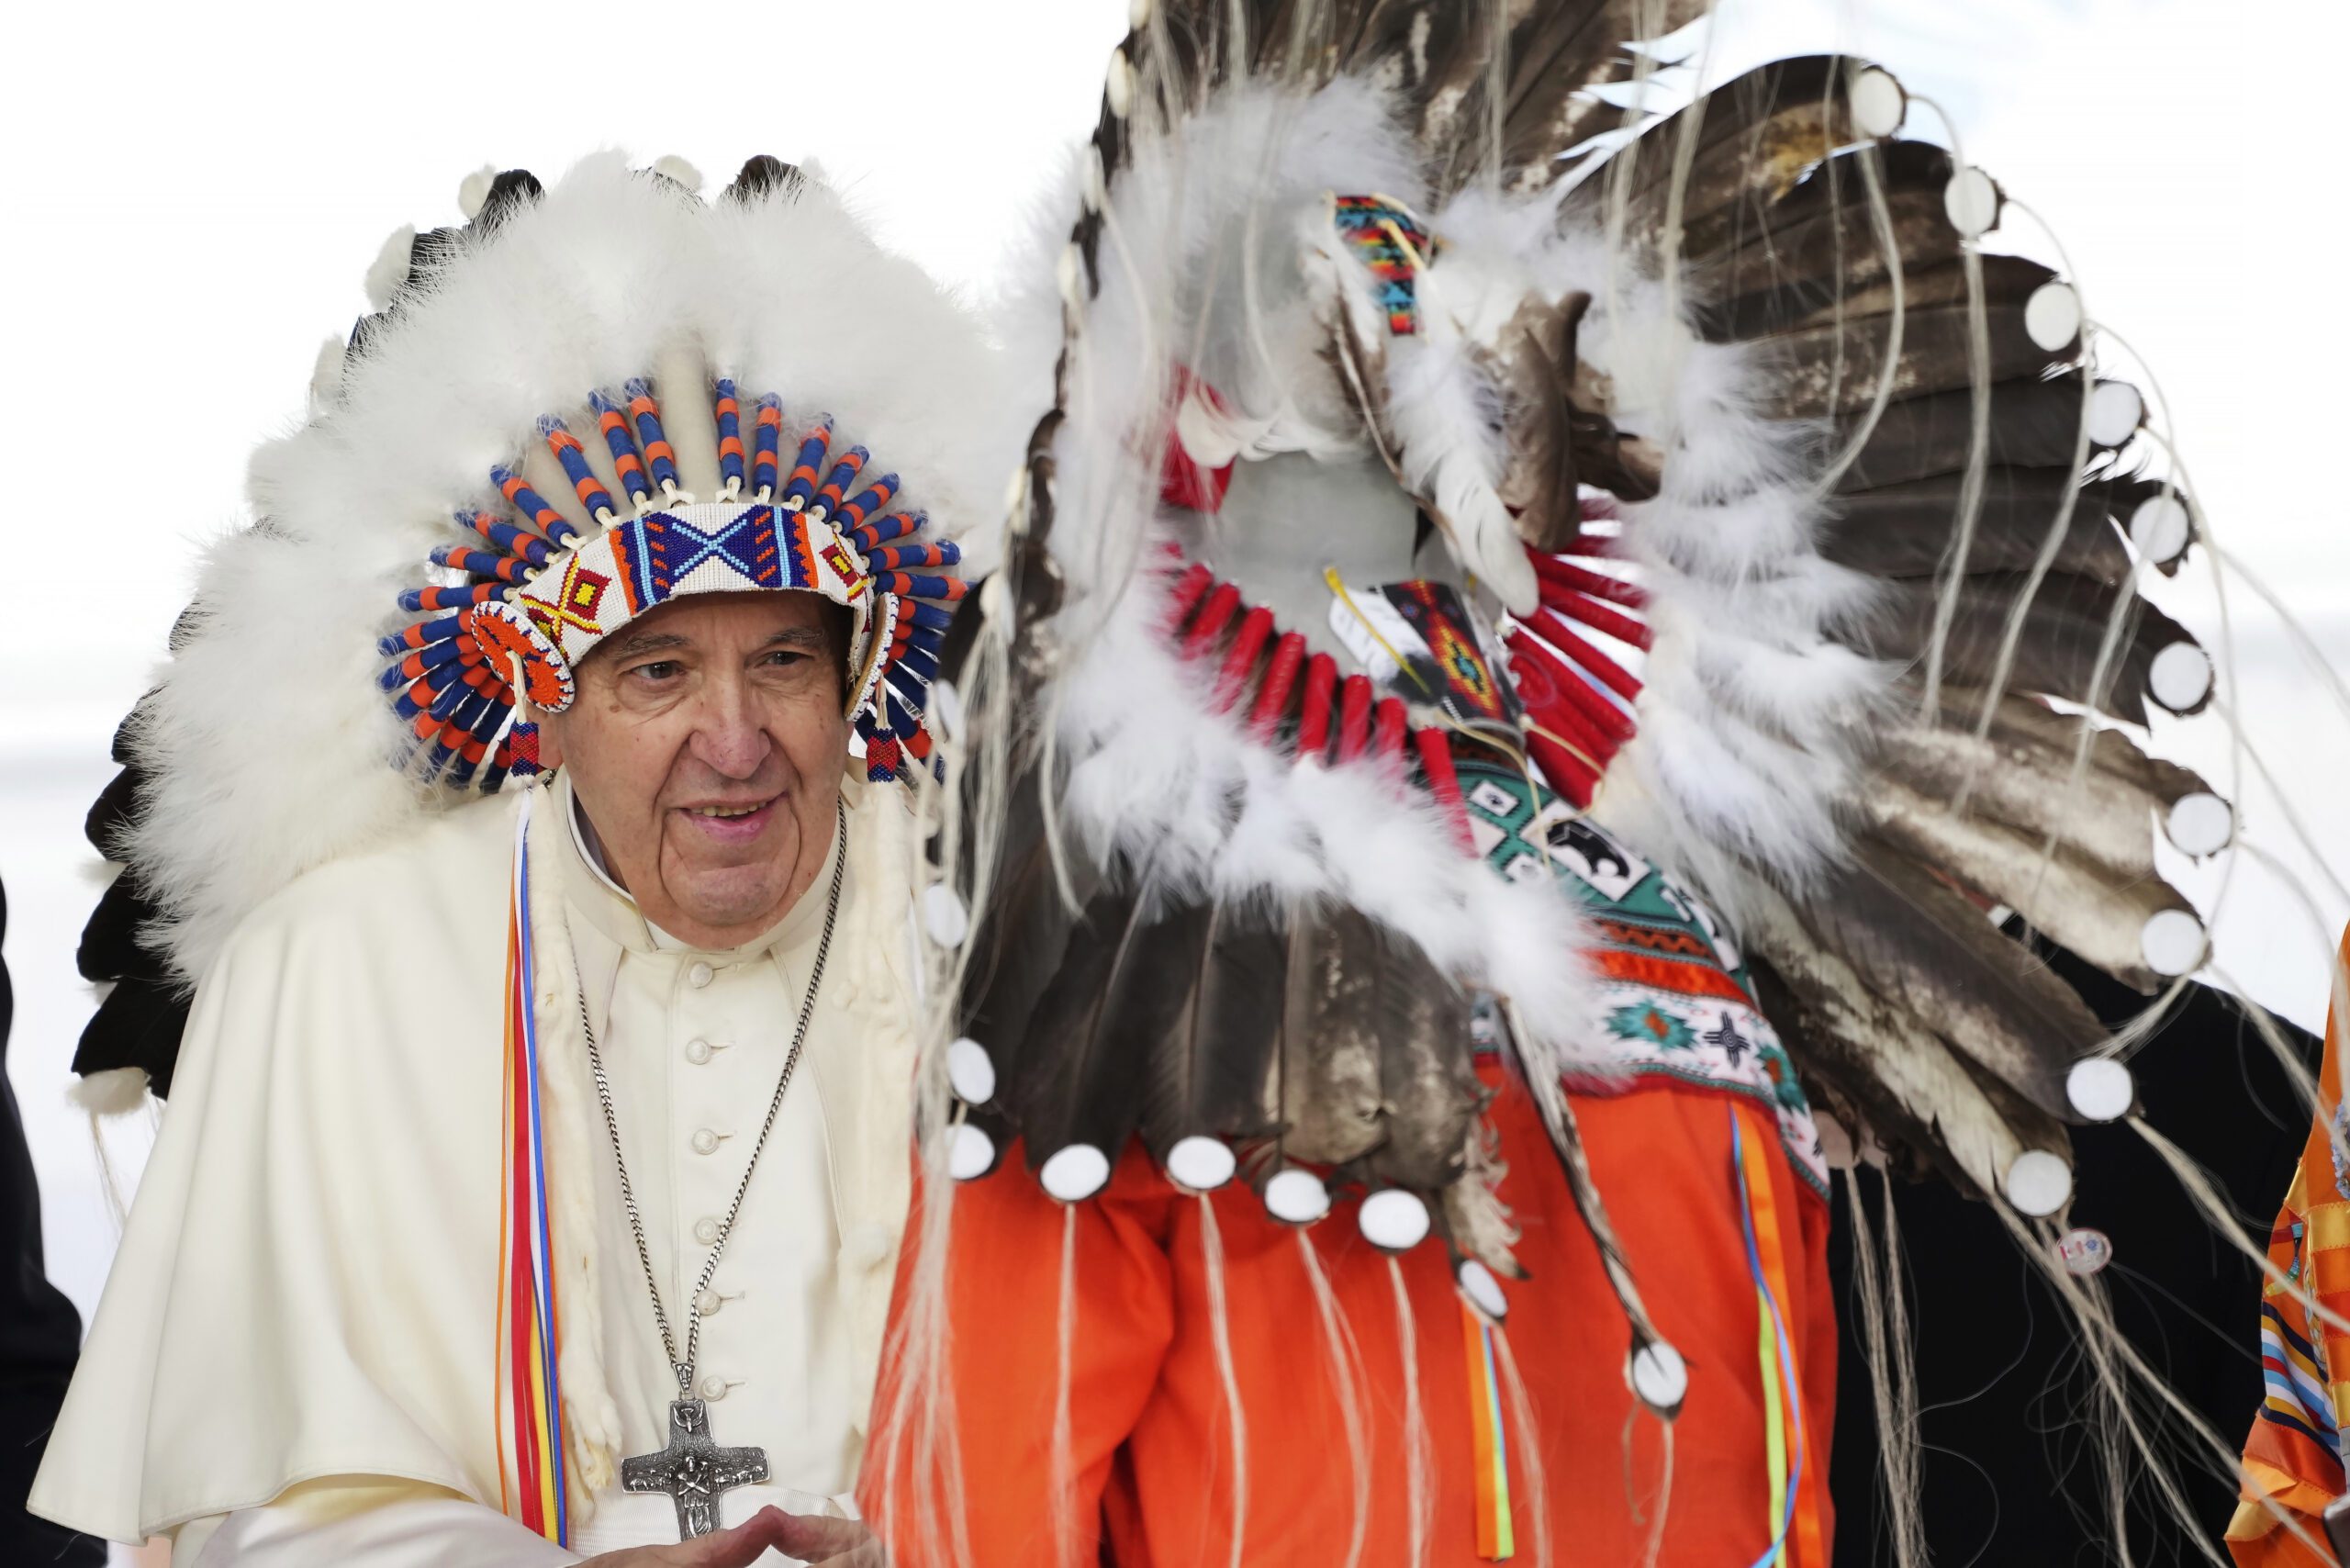 Pope Francis, left, wears a traditional headdress he was given after his apology to Indigenous people during a ceremony in Maskwacis, Alberta, as part of his papal visit across Canada, Monday, July 25, 2022. Pope Francis crisscrossed Canada this week delivering long overdue apologies to the country's Indigenous groups for the decades of abuses and cultural destruction they suffered at Catholic Church-run residential schools. (Nathan Denette/The Canadian Press via AP)